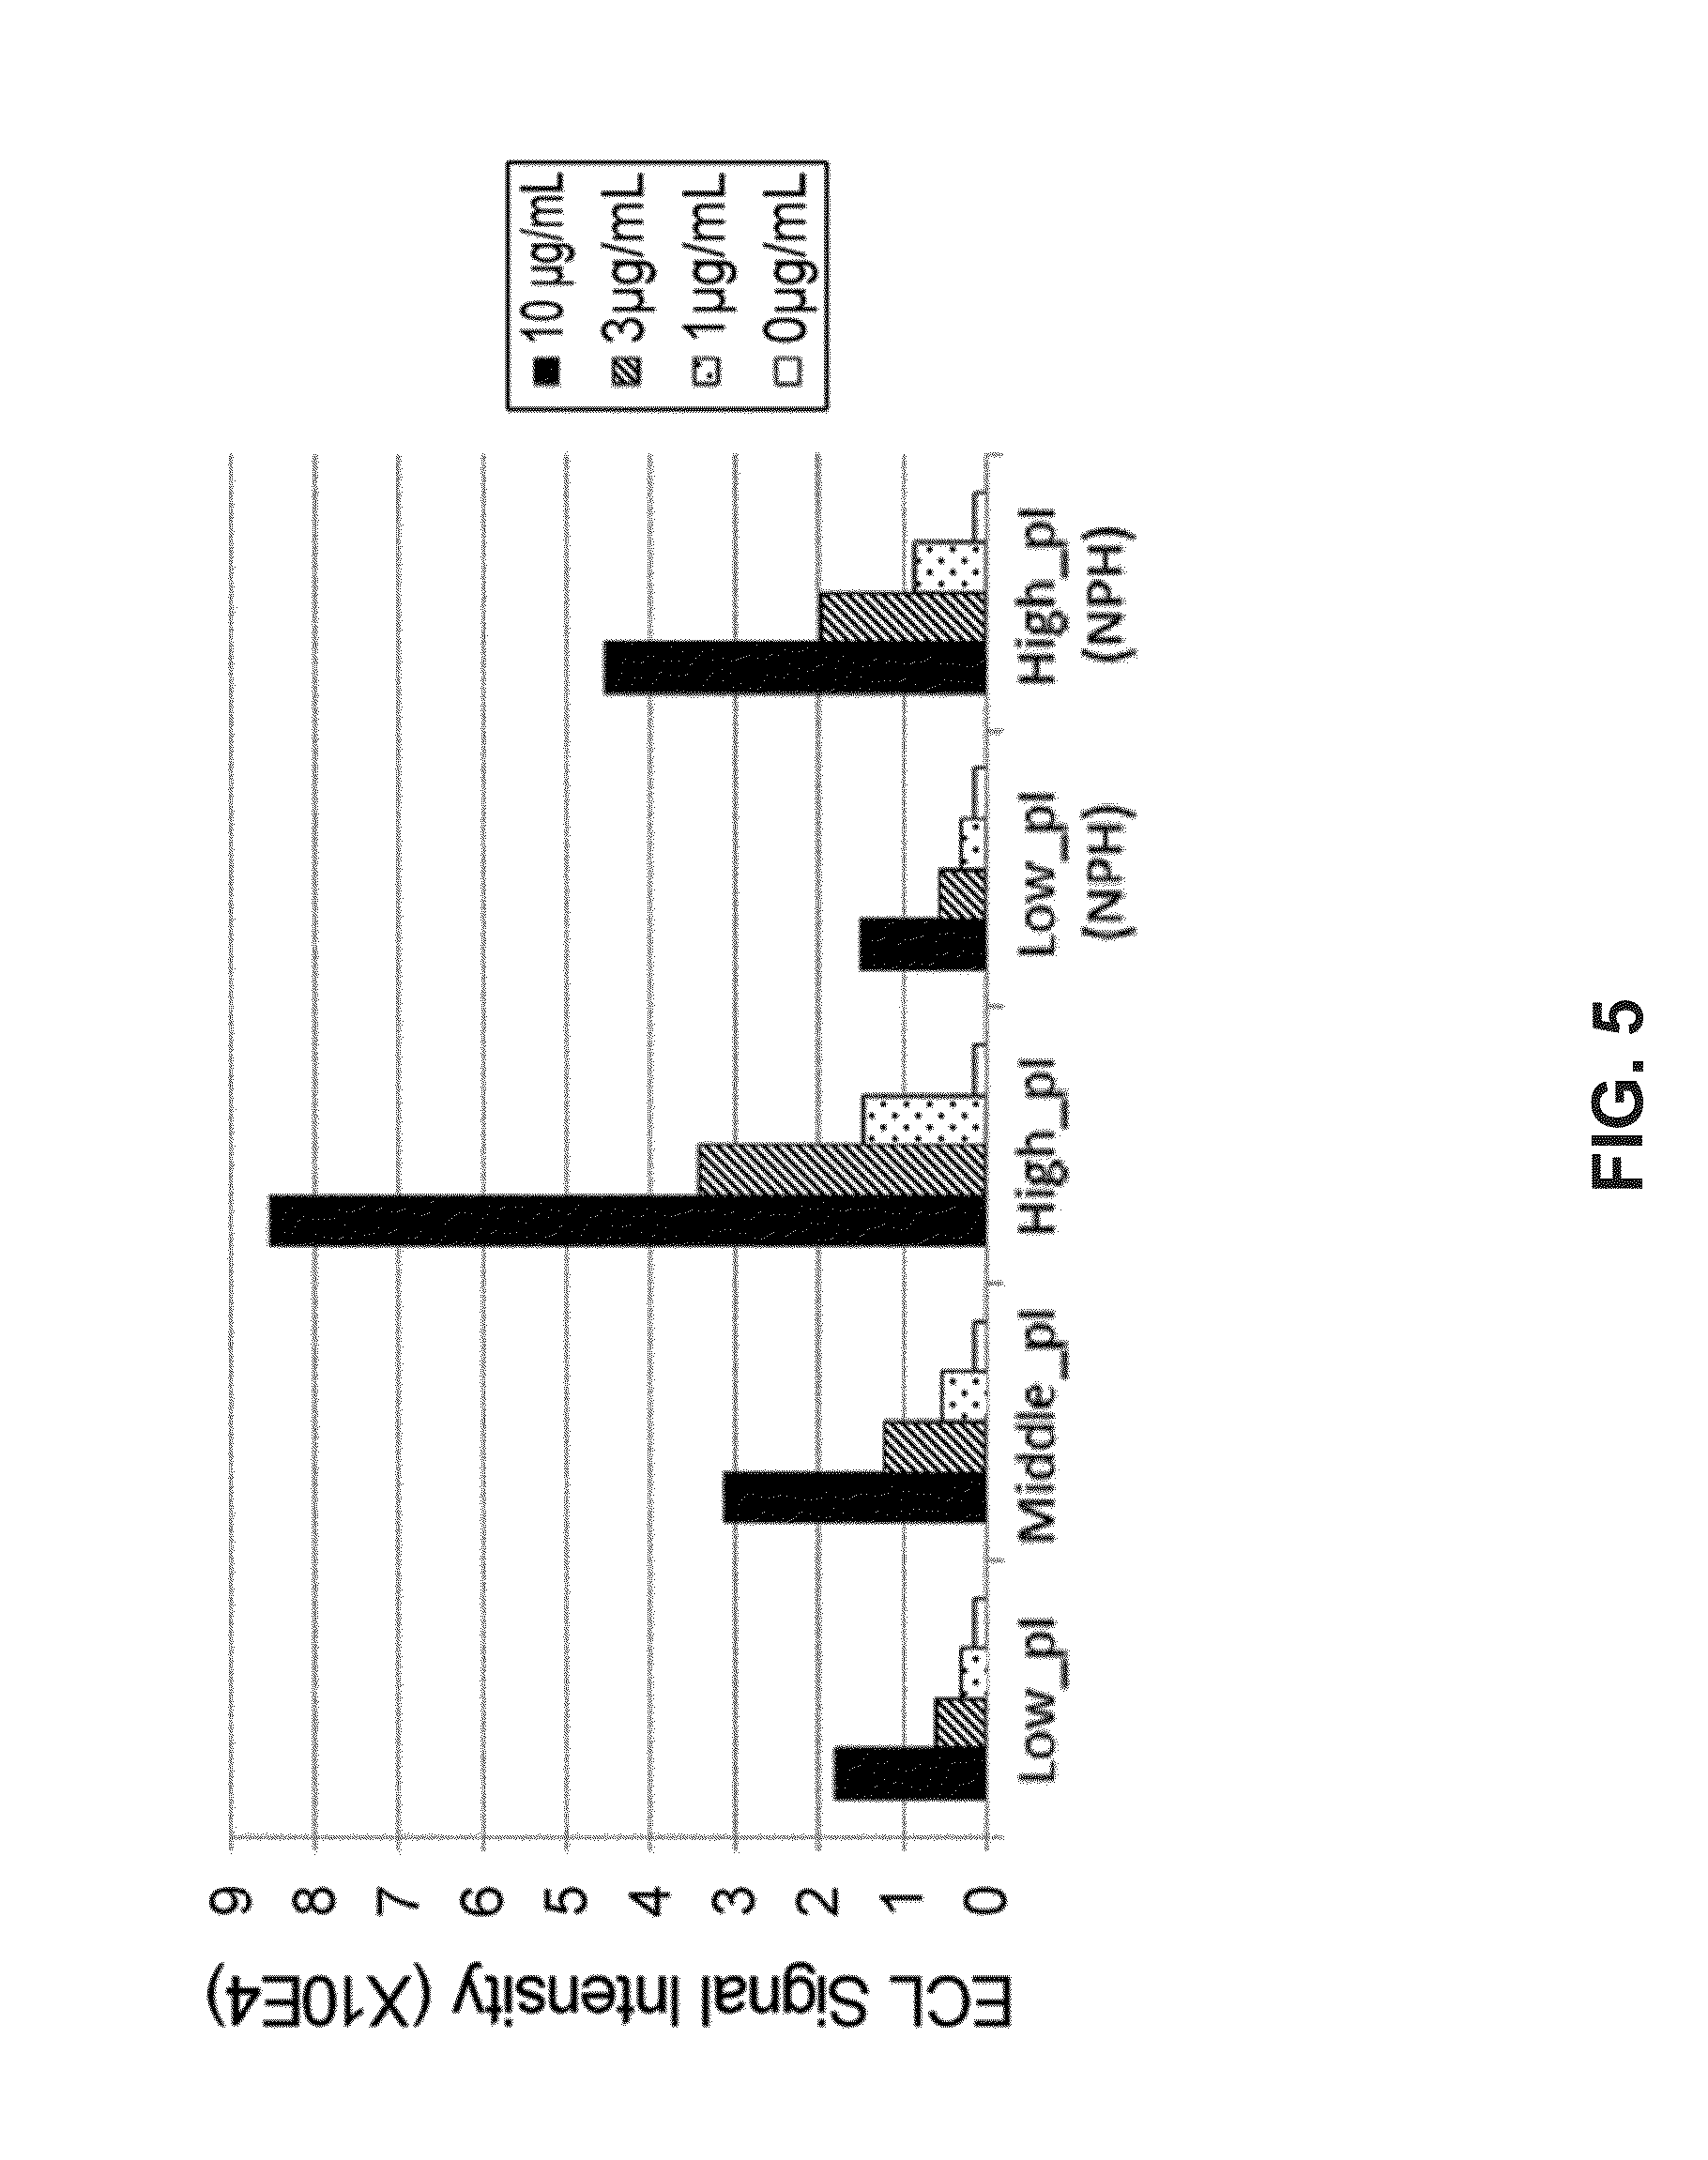 Antibodies Comprising an Ion Concentration Dependent Antigen-Binding Domain, Fc Region Variants, IL-8-Binding Antibodies, and Uses Thereof